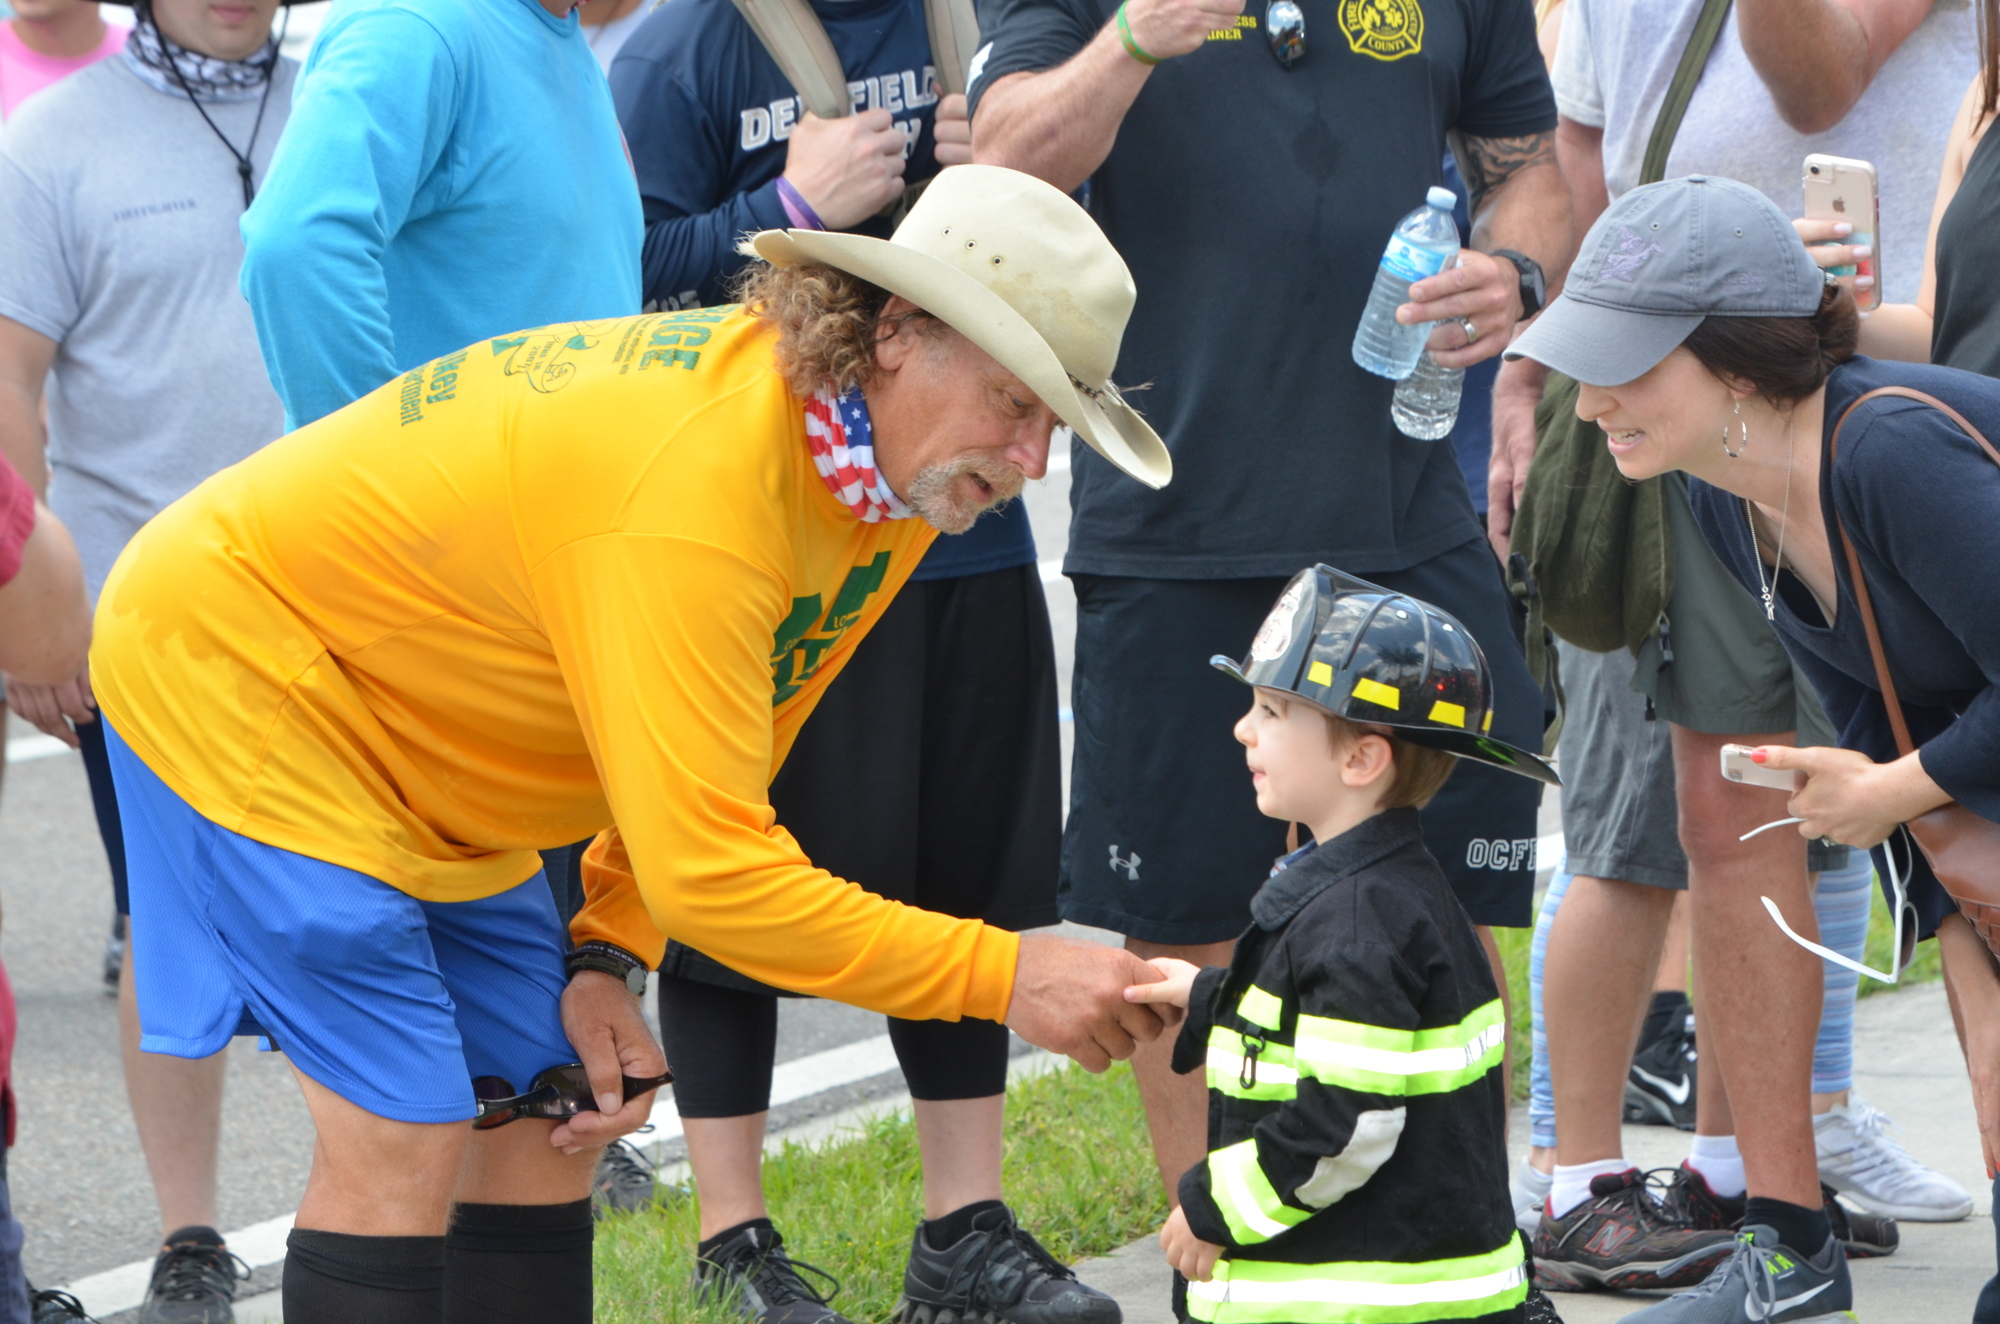 Tom “Bull” Hill stops to hang out with Rory Beiler, dressed as a firefighter, in Winter Garden during a stop on his 650-mile walk to Tallahassee.